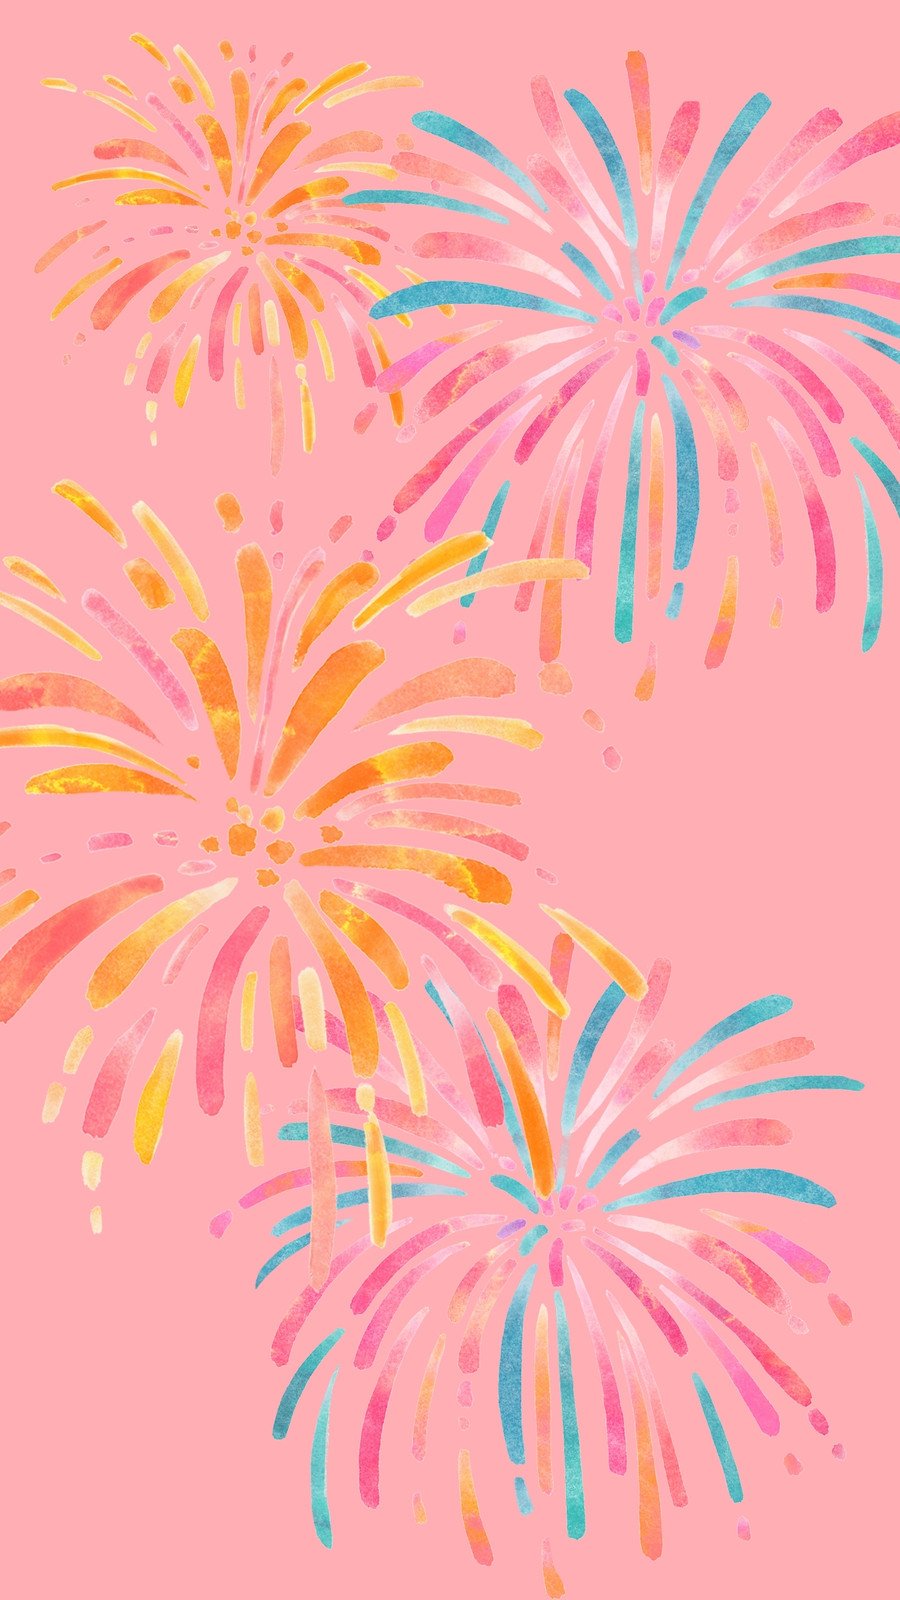 Fireworks animation kit By Cartoon time!